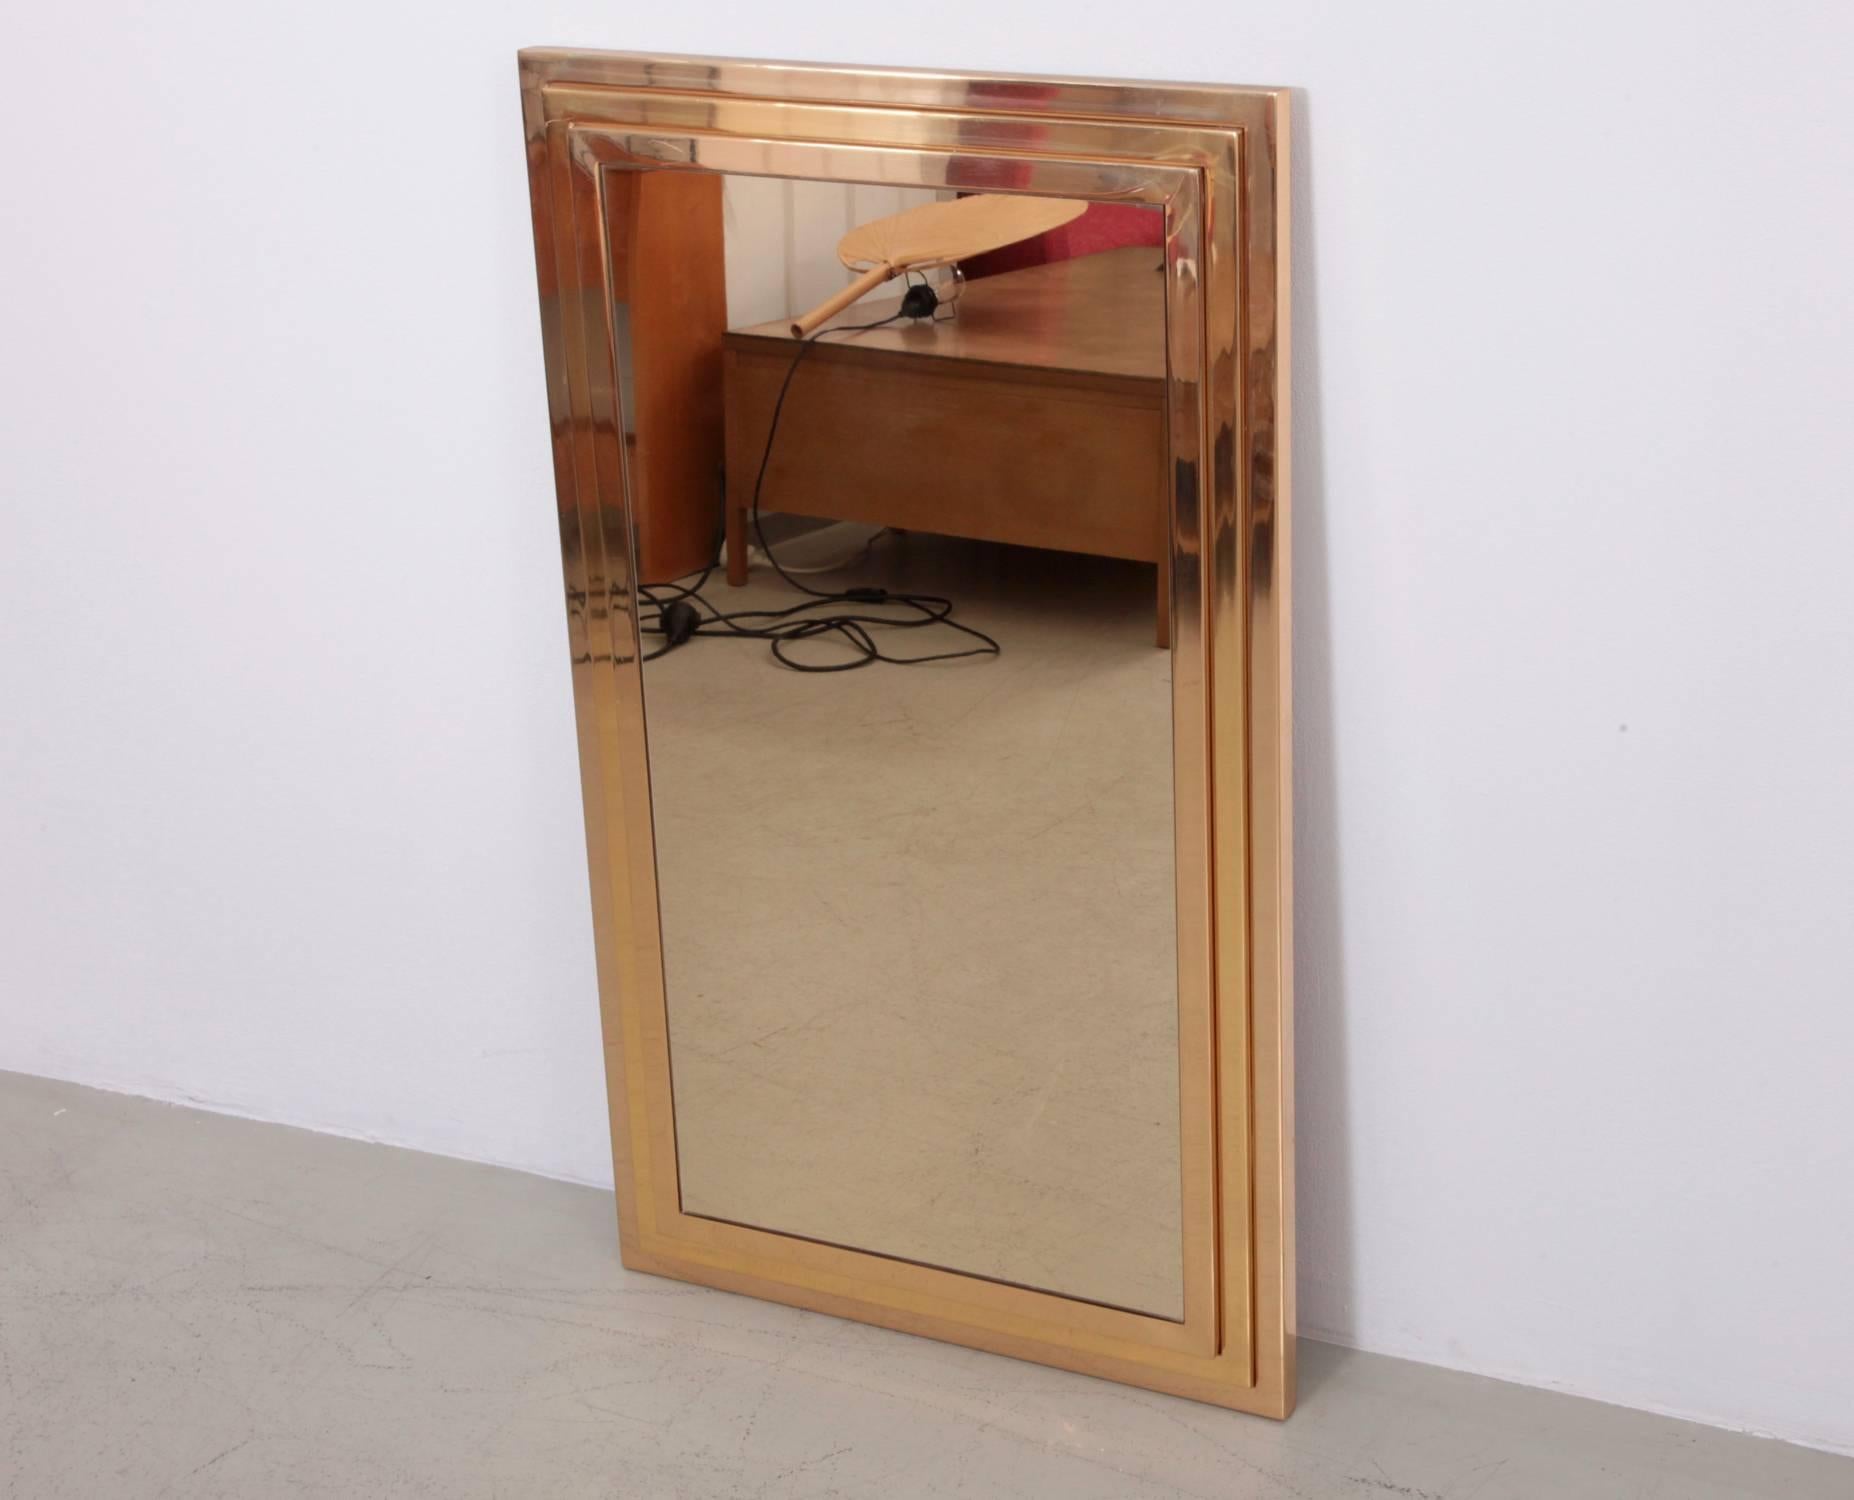 Wonderful brass mirror in high end quality with a golden colored mirror. The mirror is made in the manner of Willy Rizzo and it is in a very good condition.